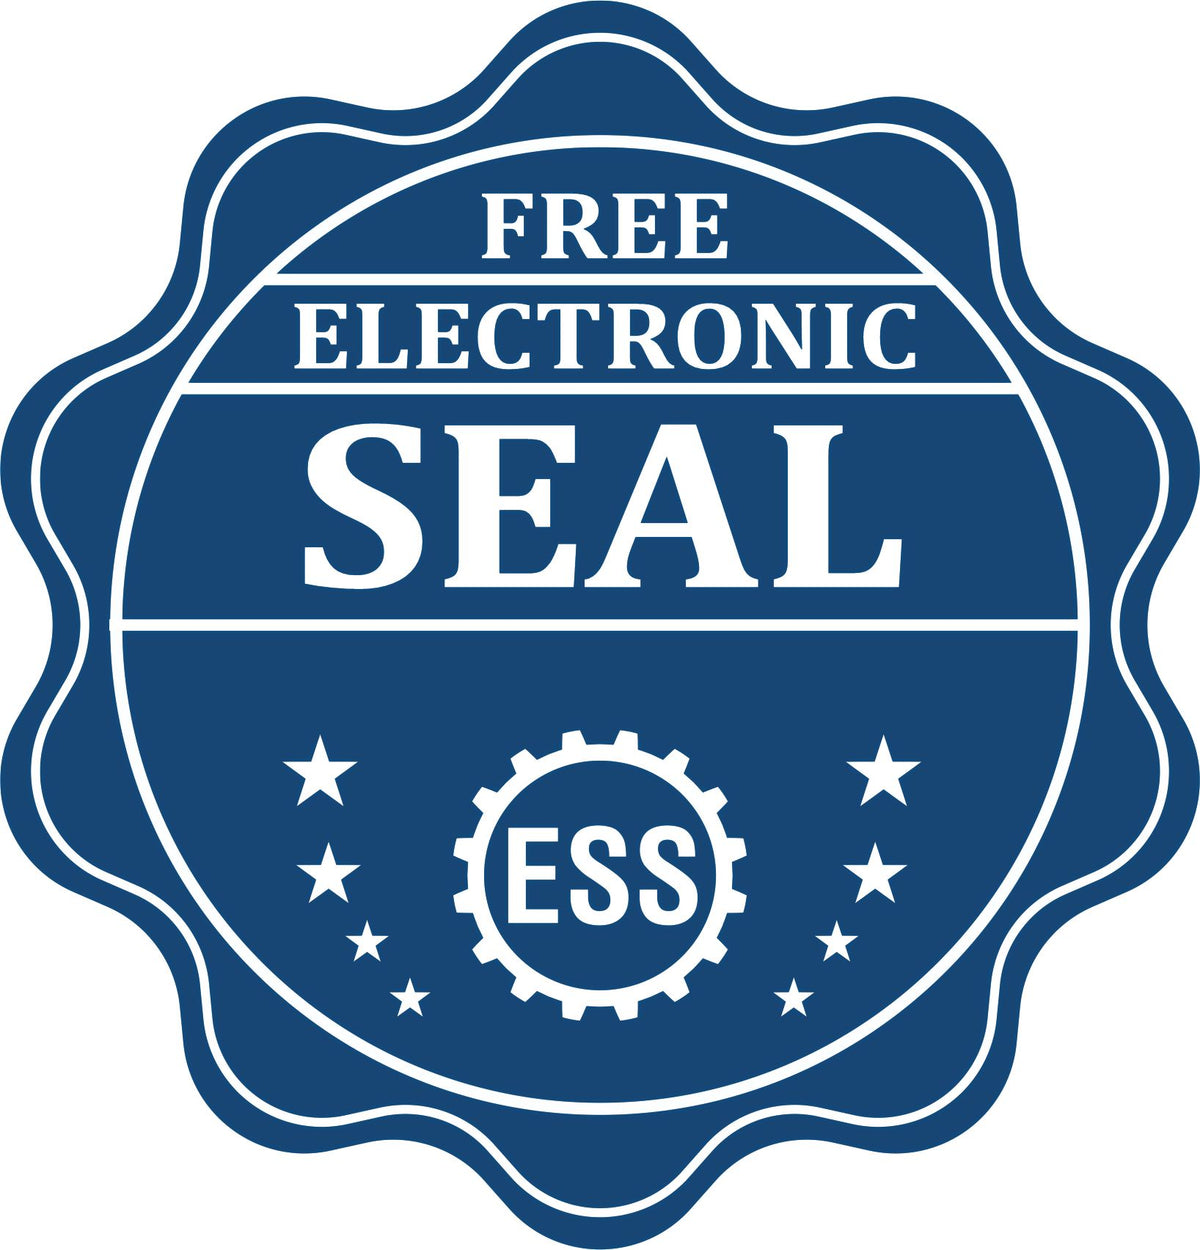 A badge showing a free electronic seal for the State of Illinois Extended Long Reach Geologist Seal with stars and the ESS gear on the emblem.